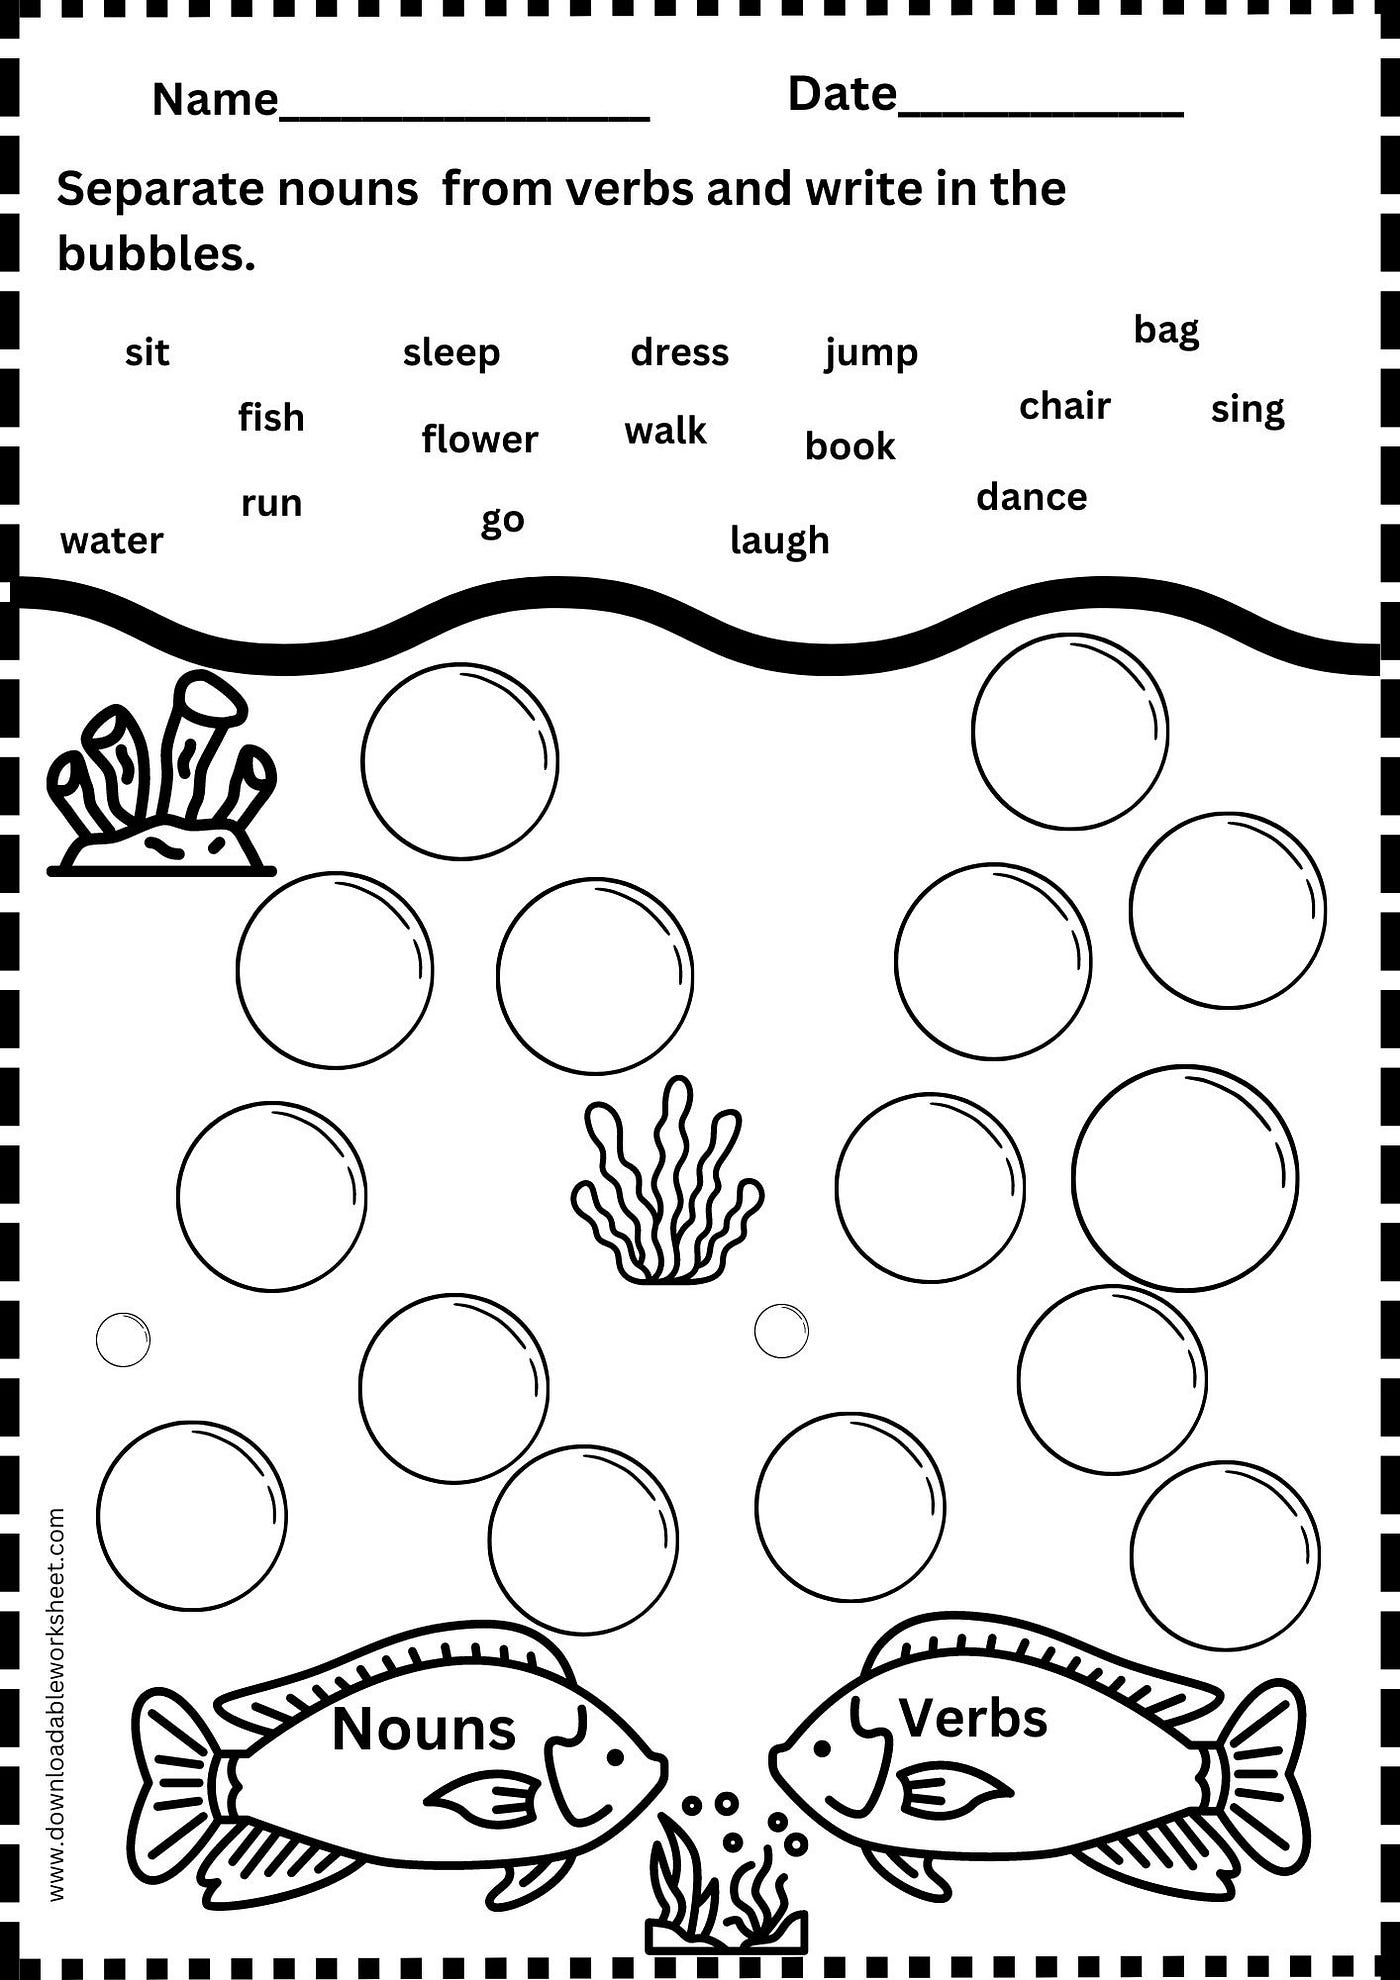 Summer Dot Activity {Free Printables} - The Resourceful Mama